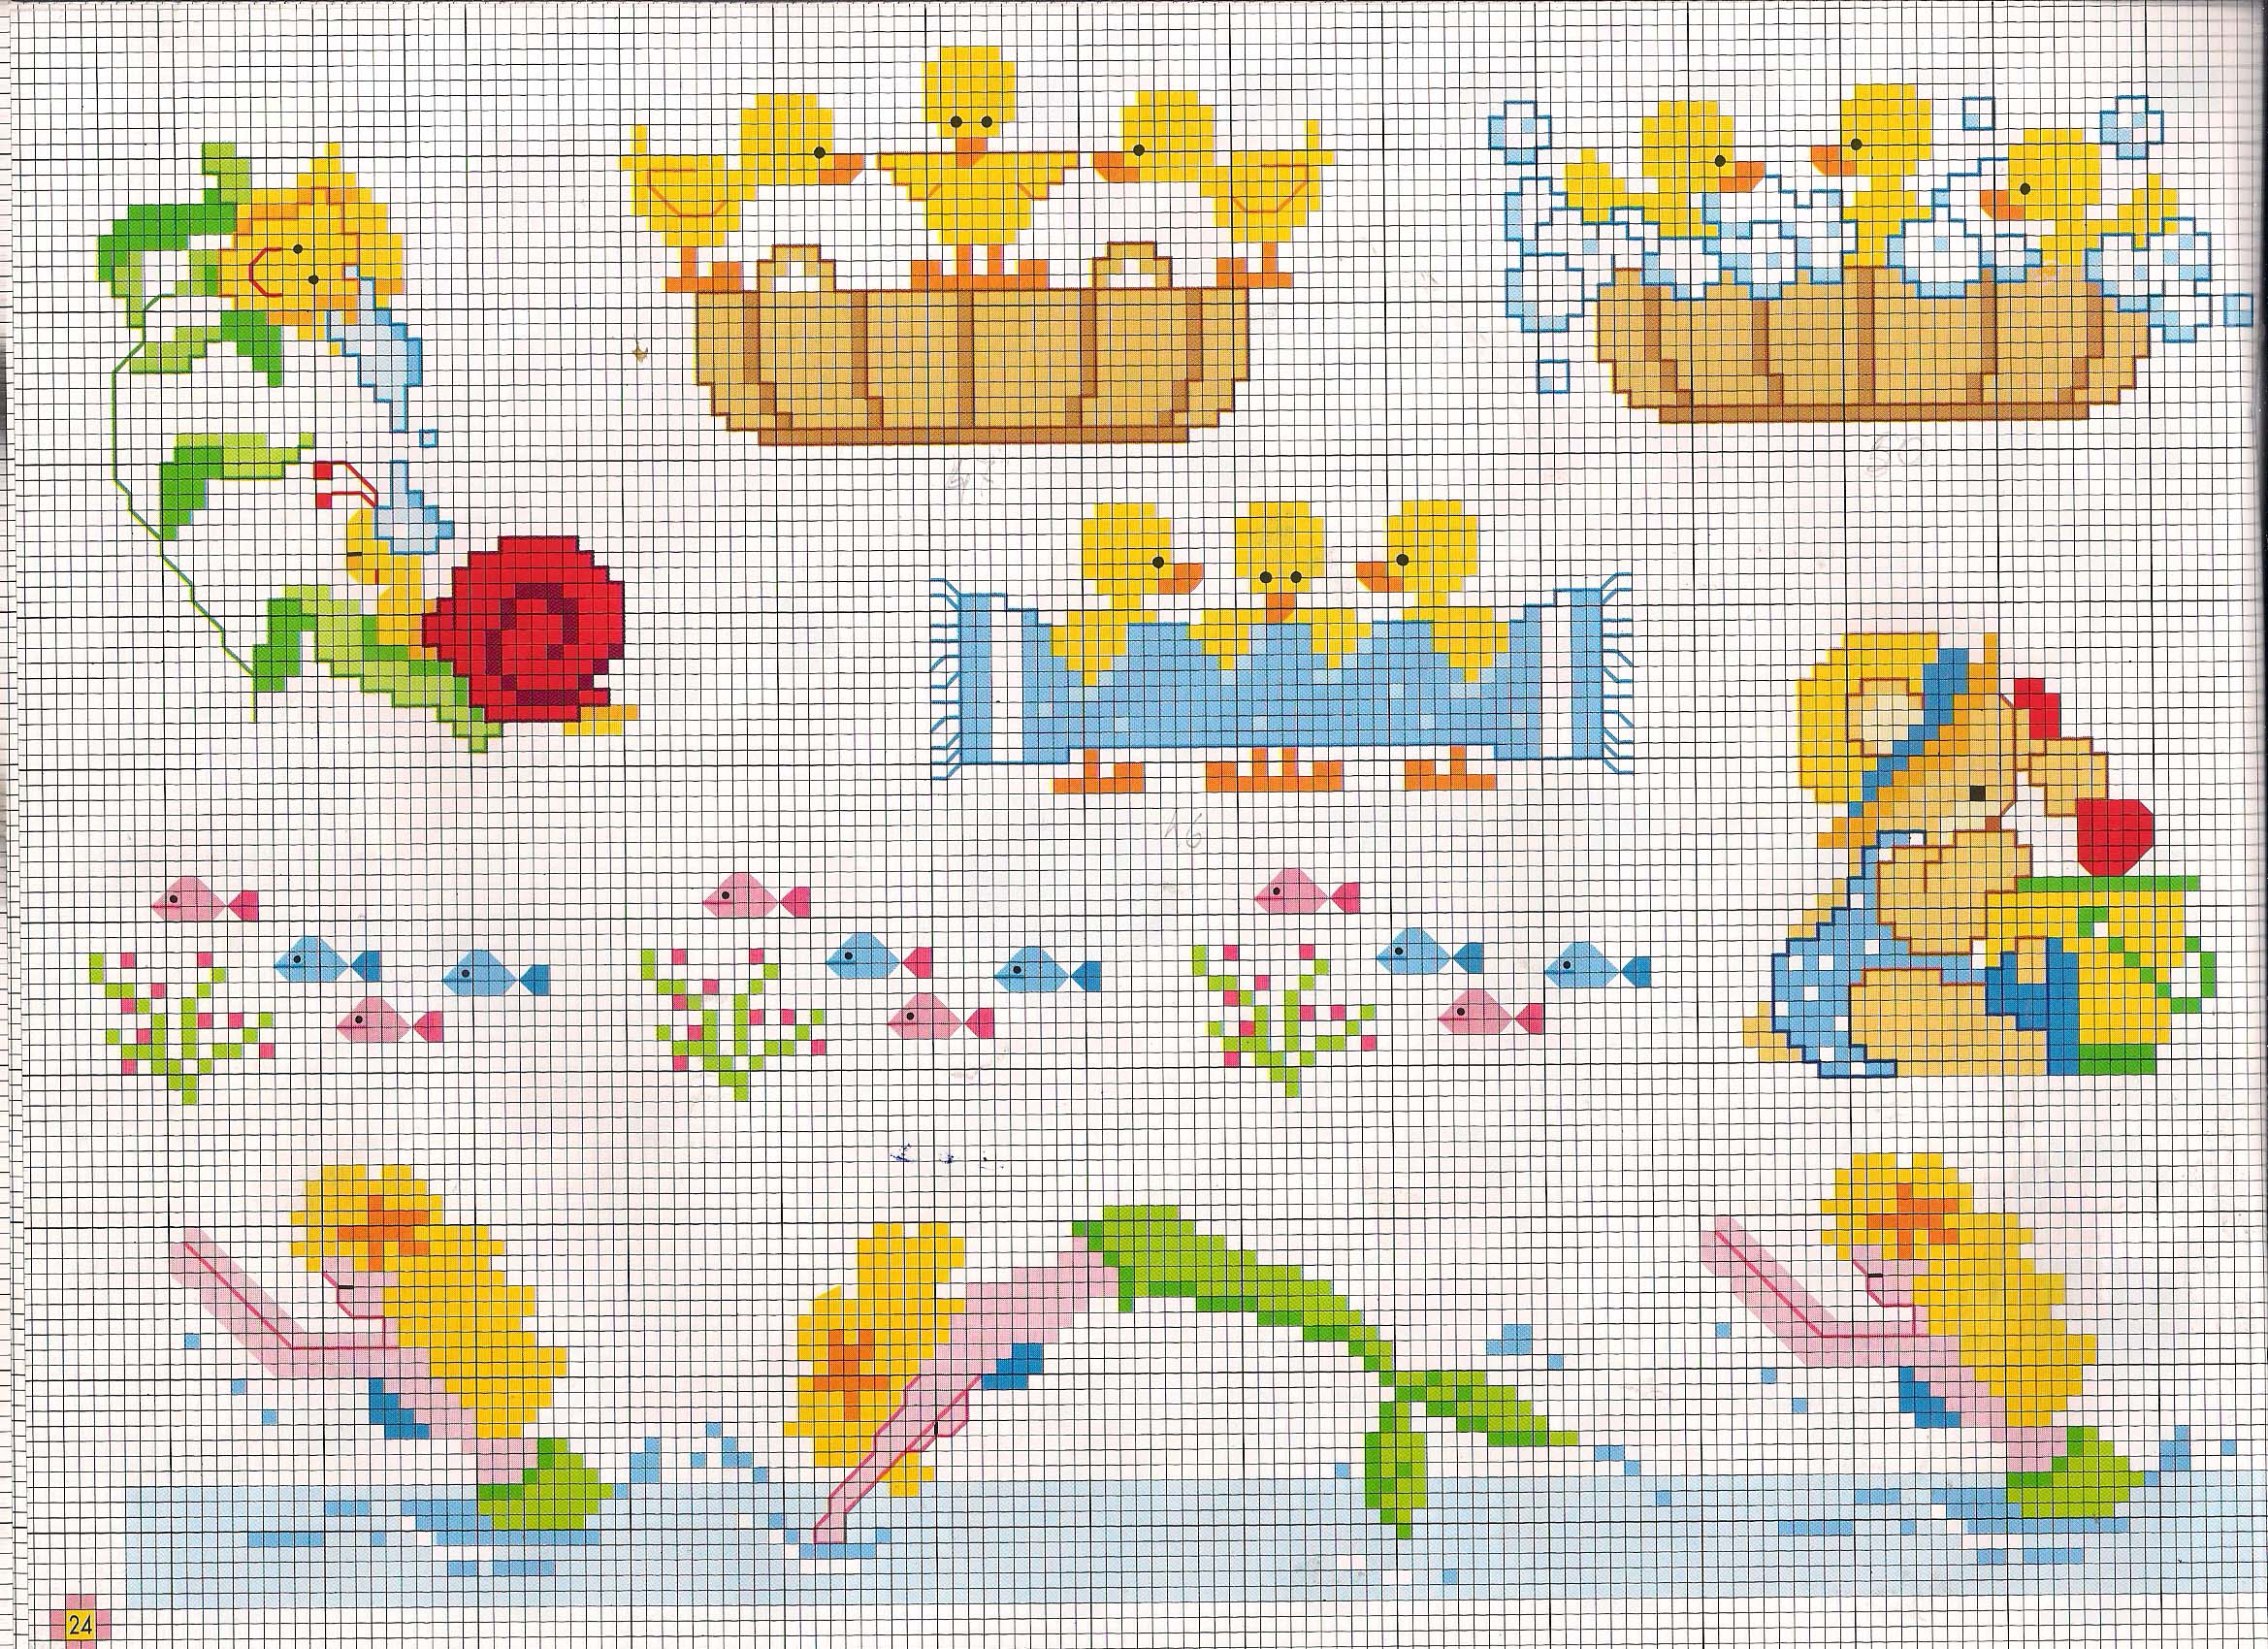 Sirens chicks snails and fish cover cross stitch ideas